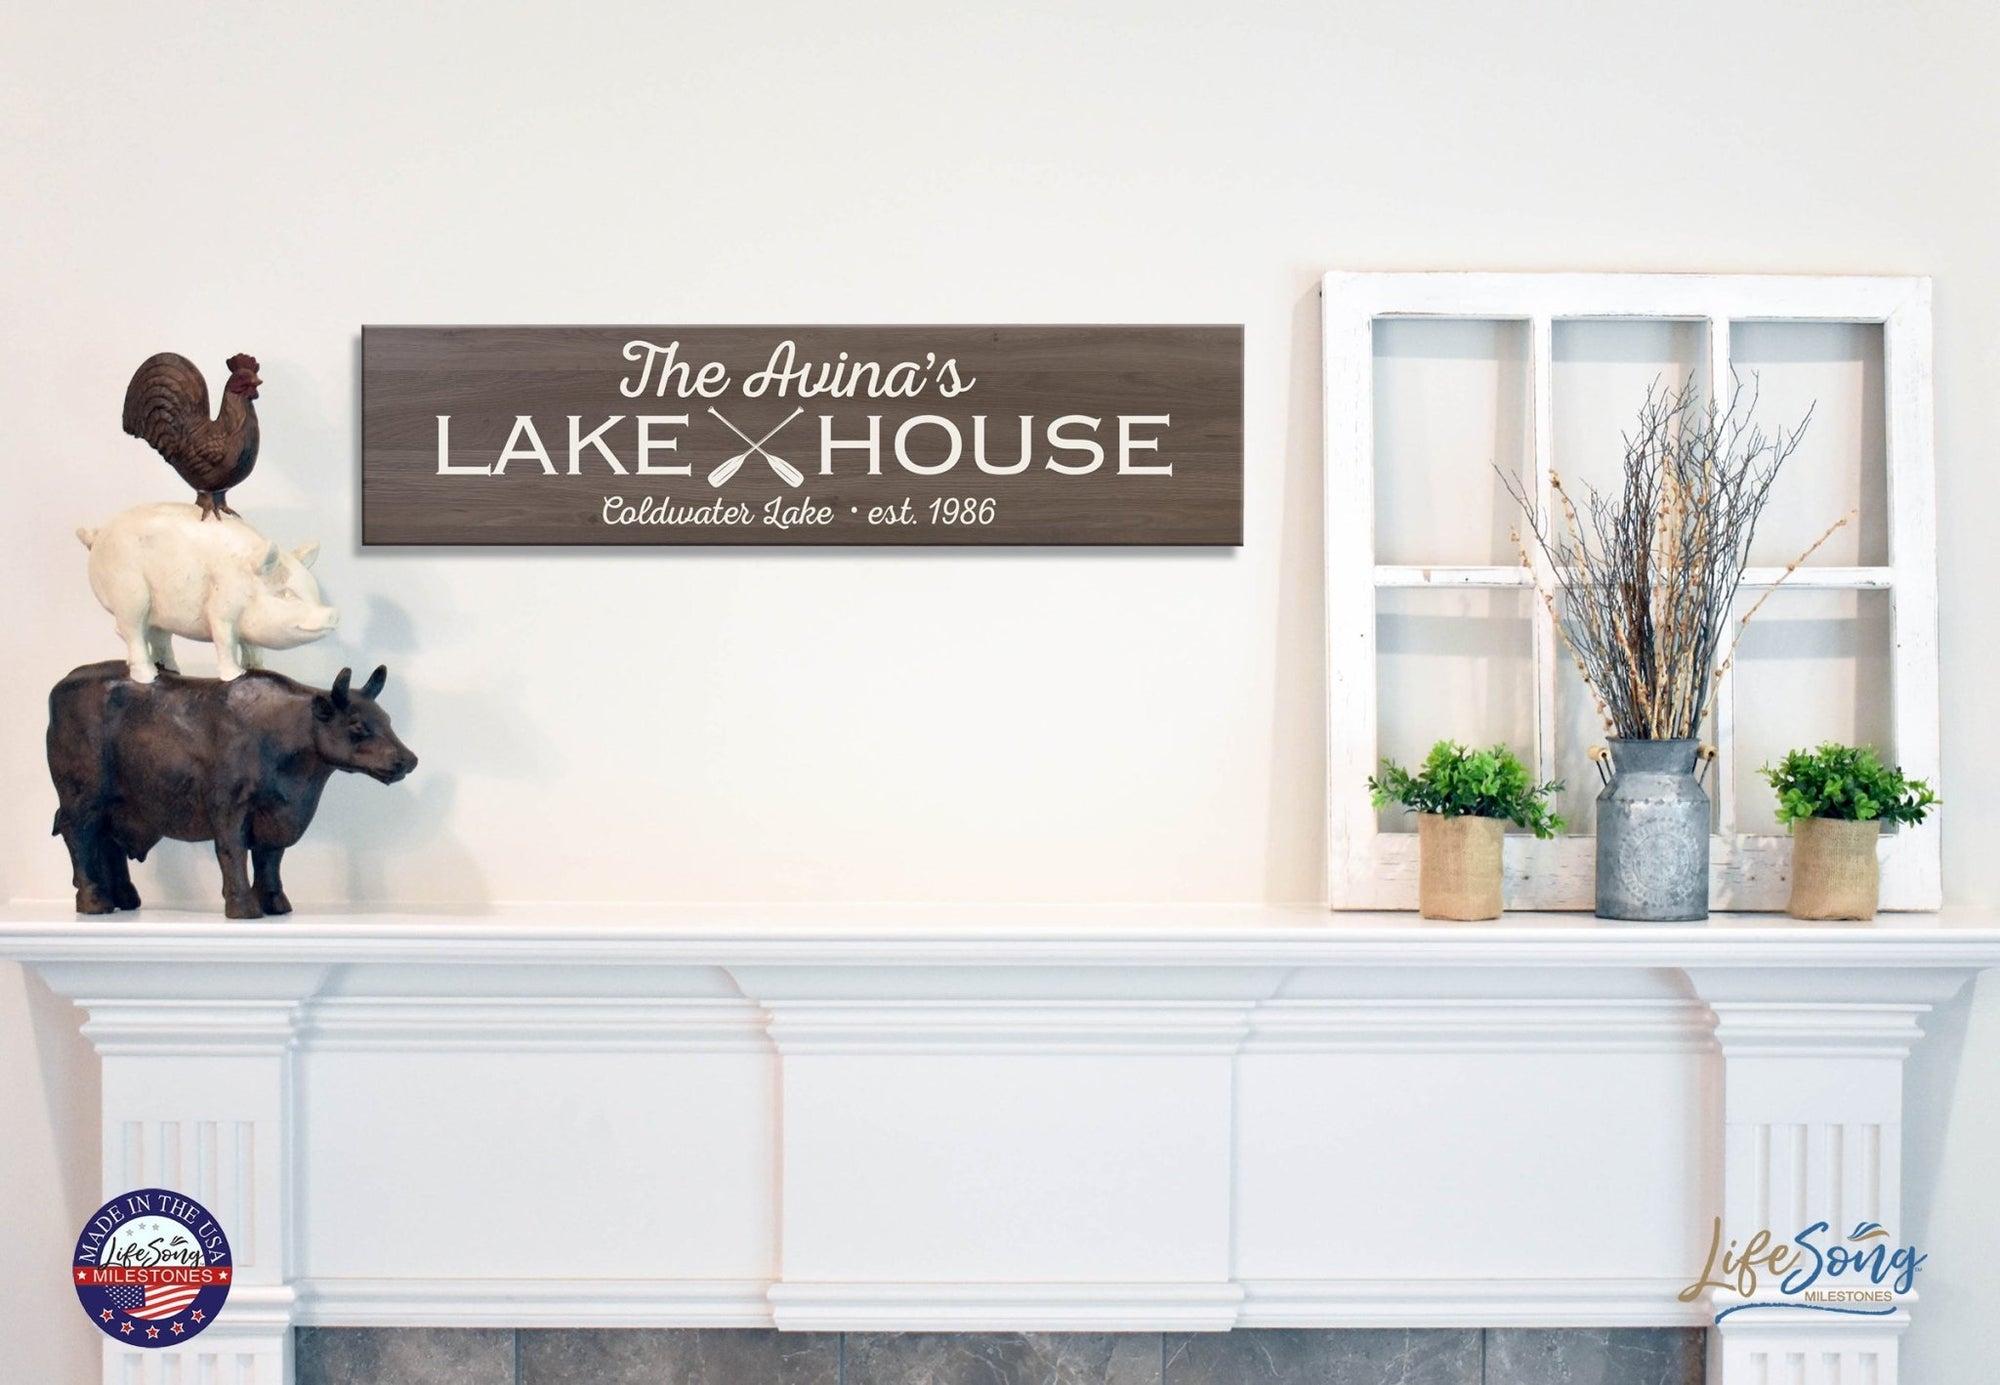 Personalized Inspirational Modern Family Beach House Wooden Wall Plaque 10x40 – Lake House (Oar) - LifeSong Milestones